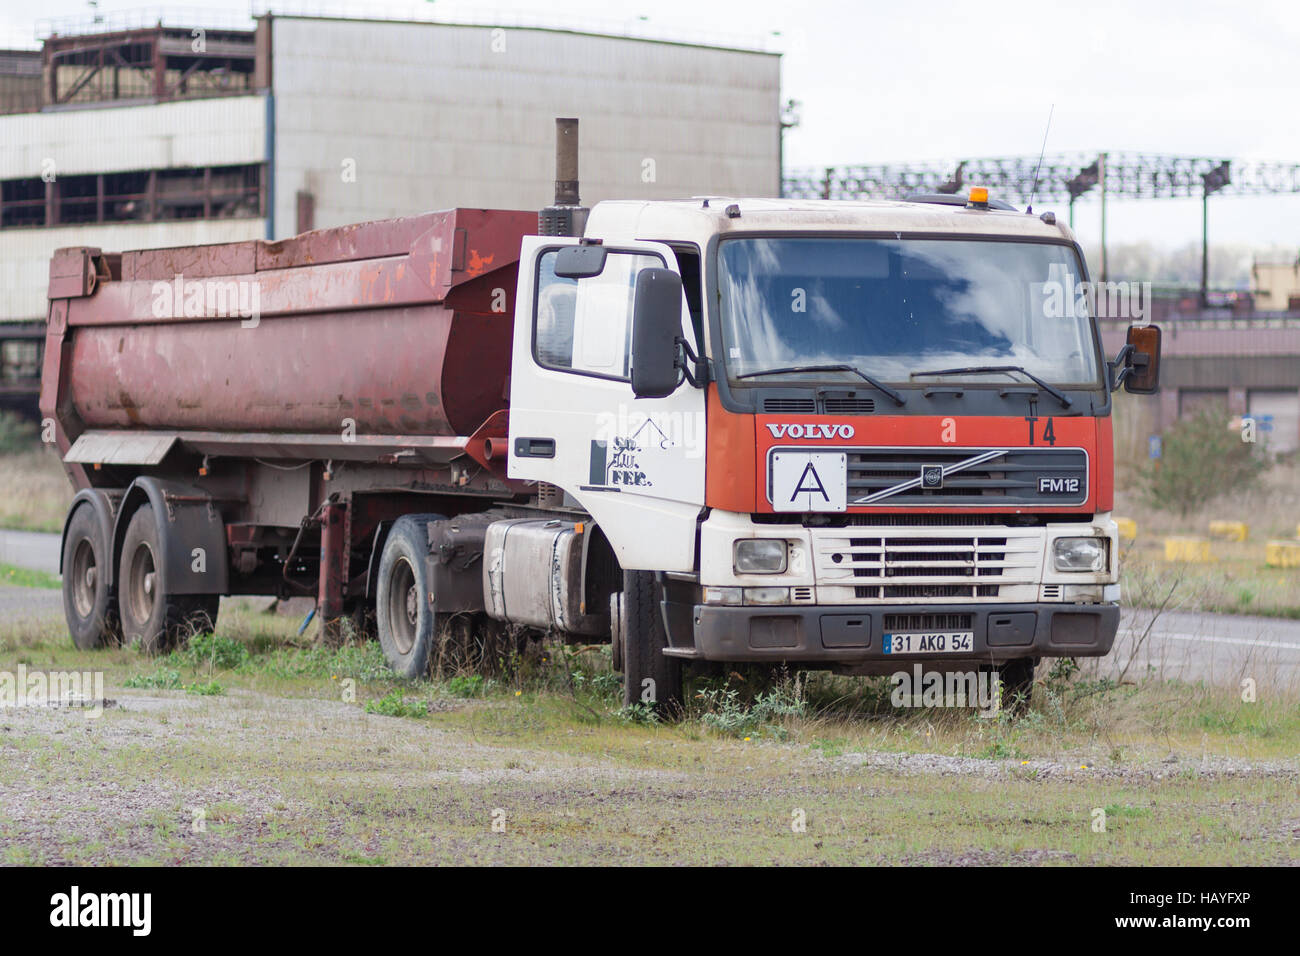 Truck in abandoned metal factory Stock Photo